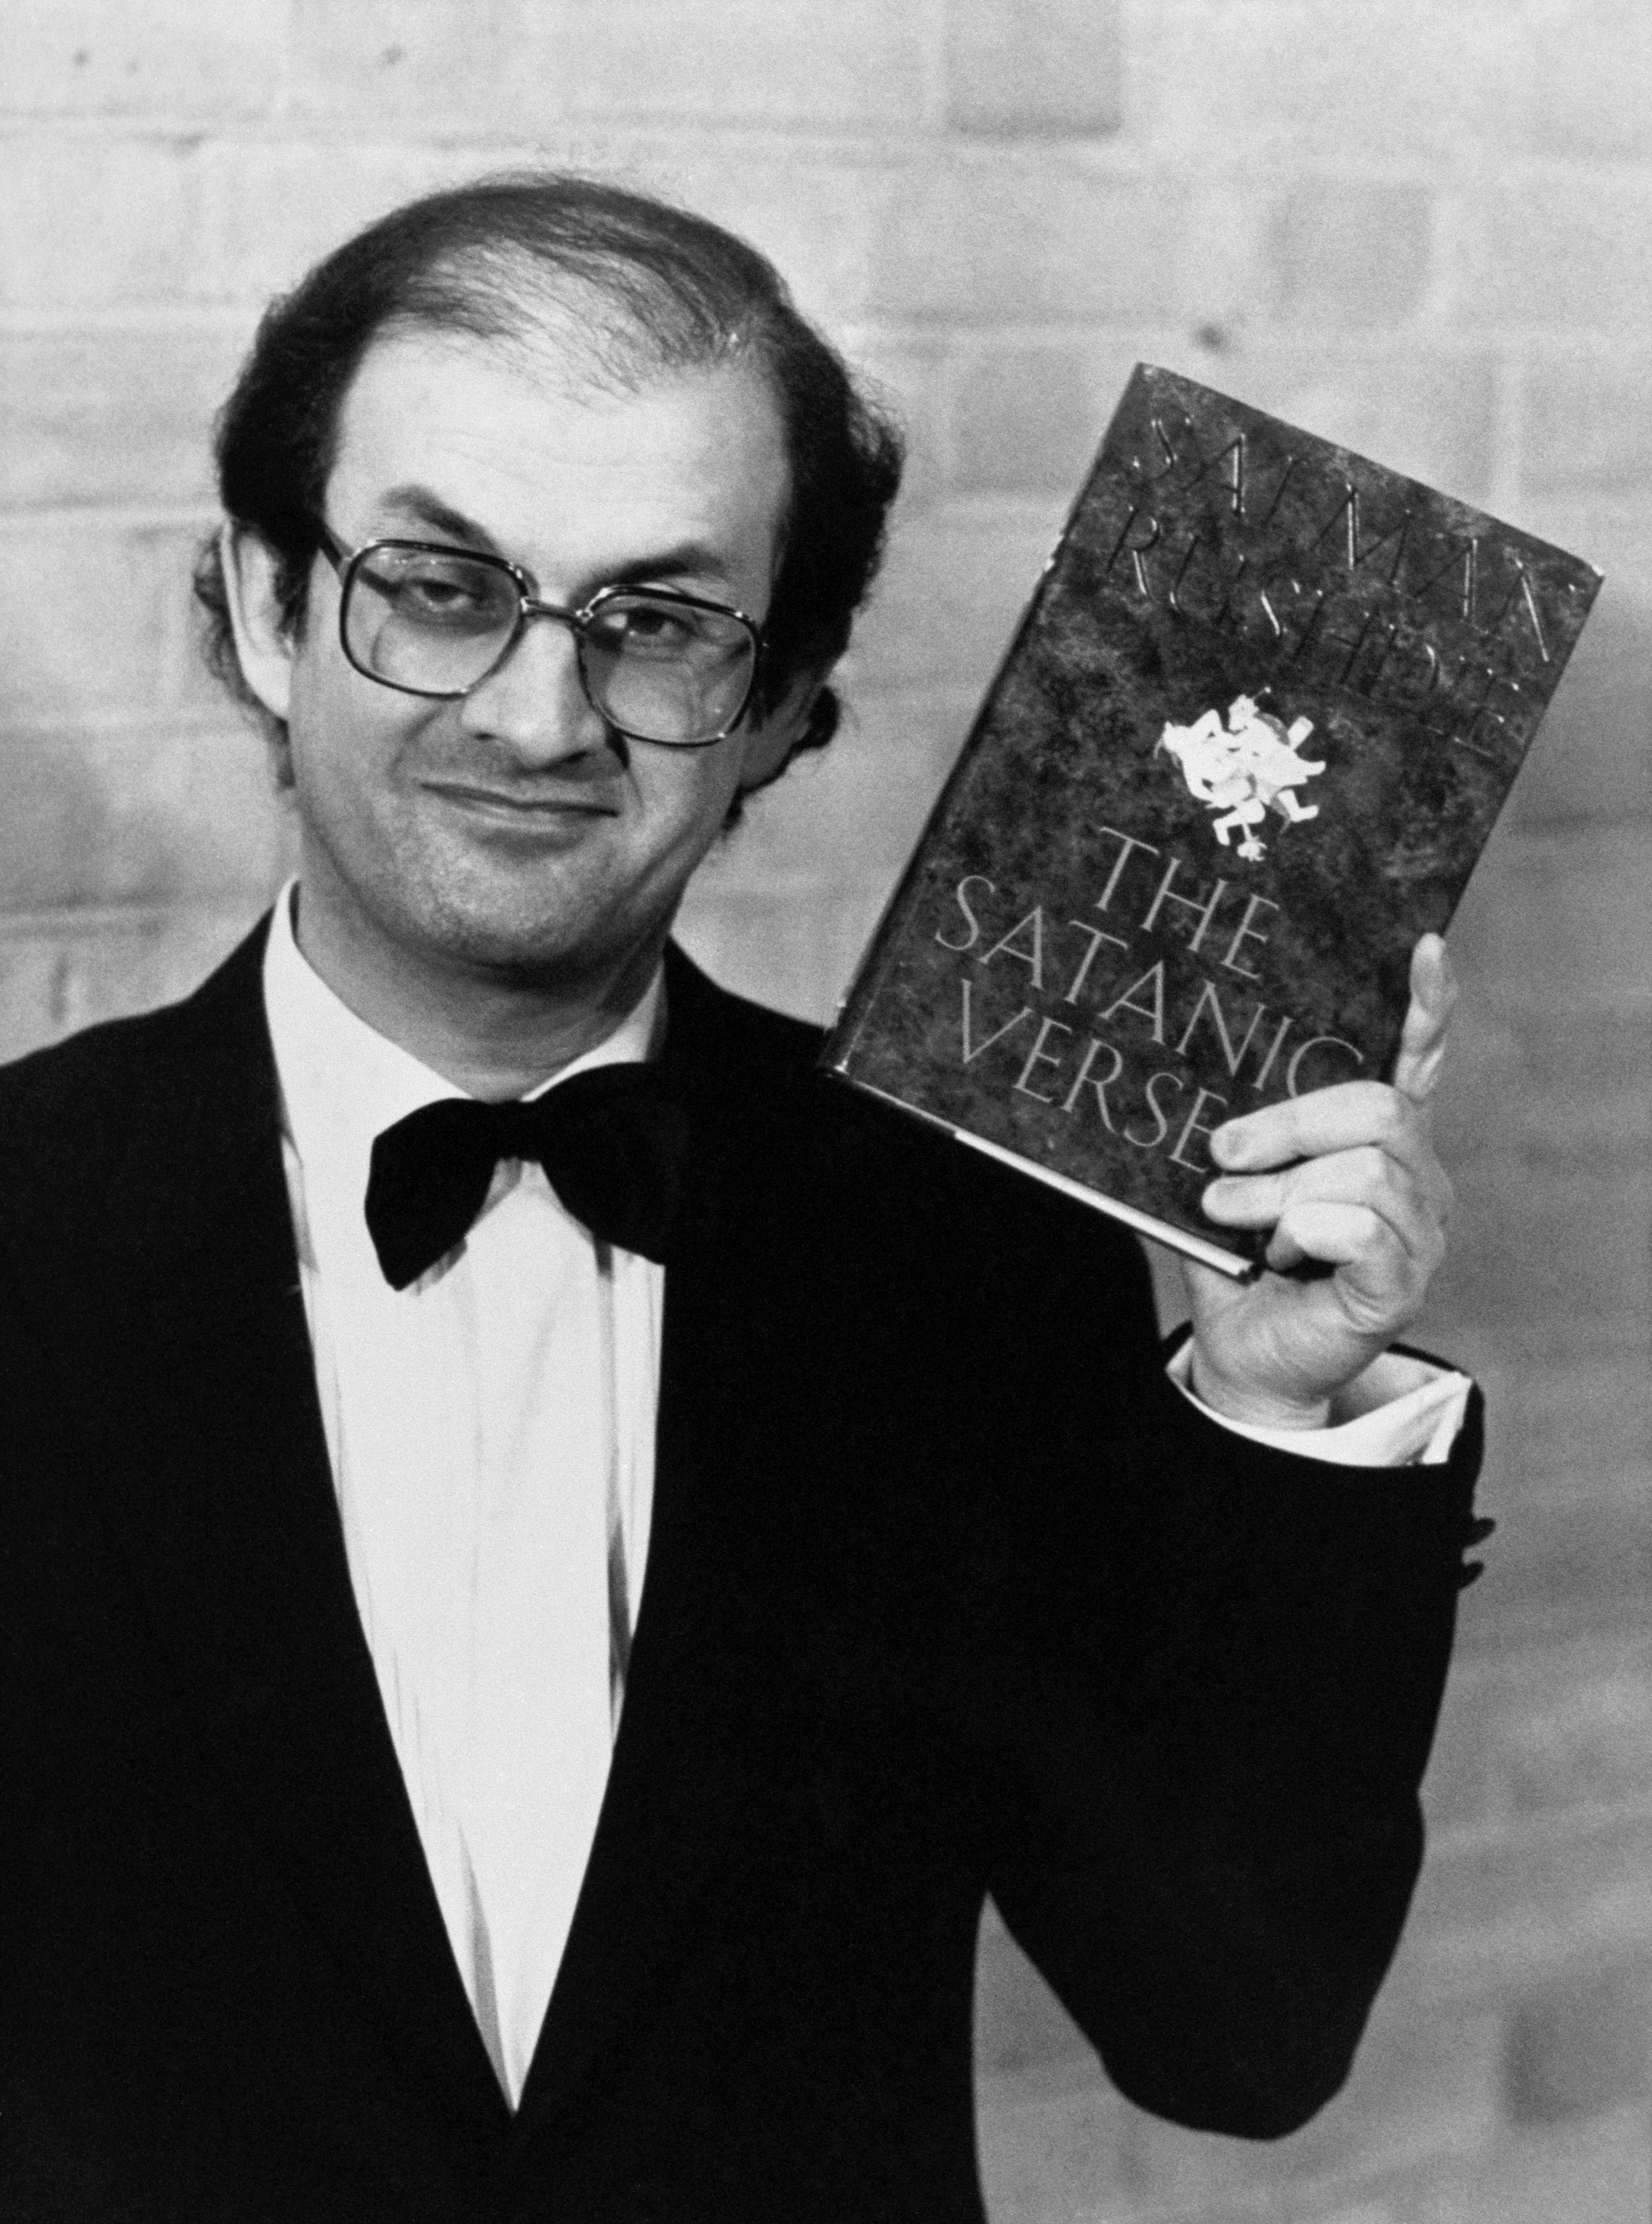 Salman Rushdie published The Satanic Verses in 1988